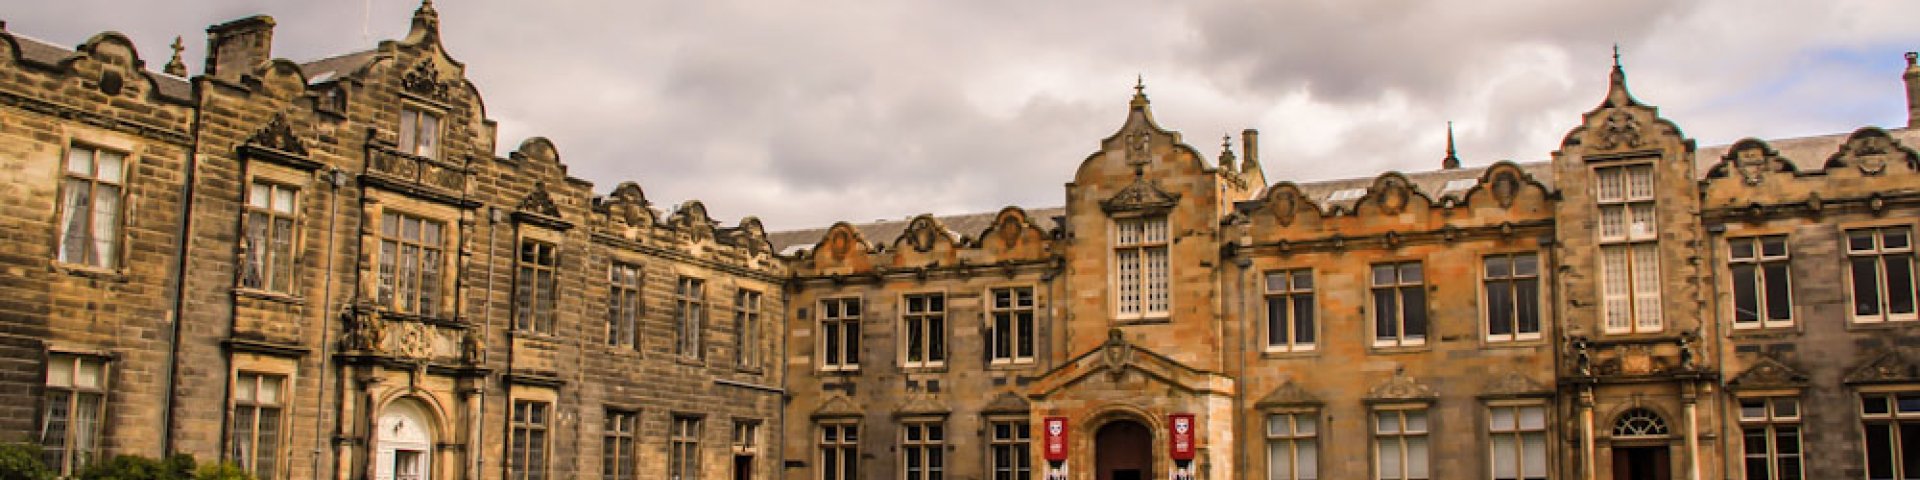 St Salvator's Quad at the University of St Andrews